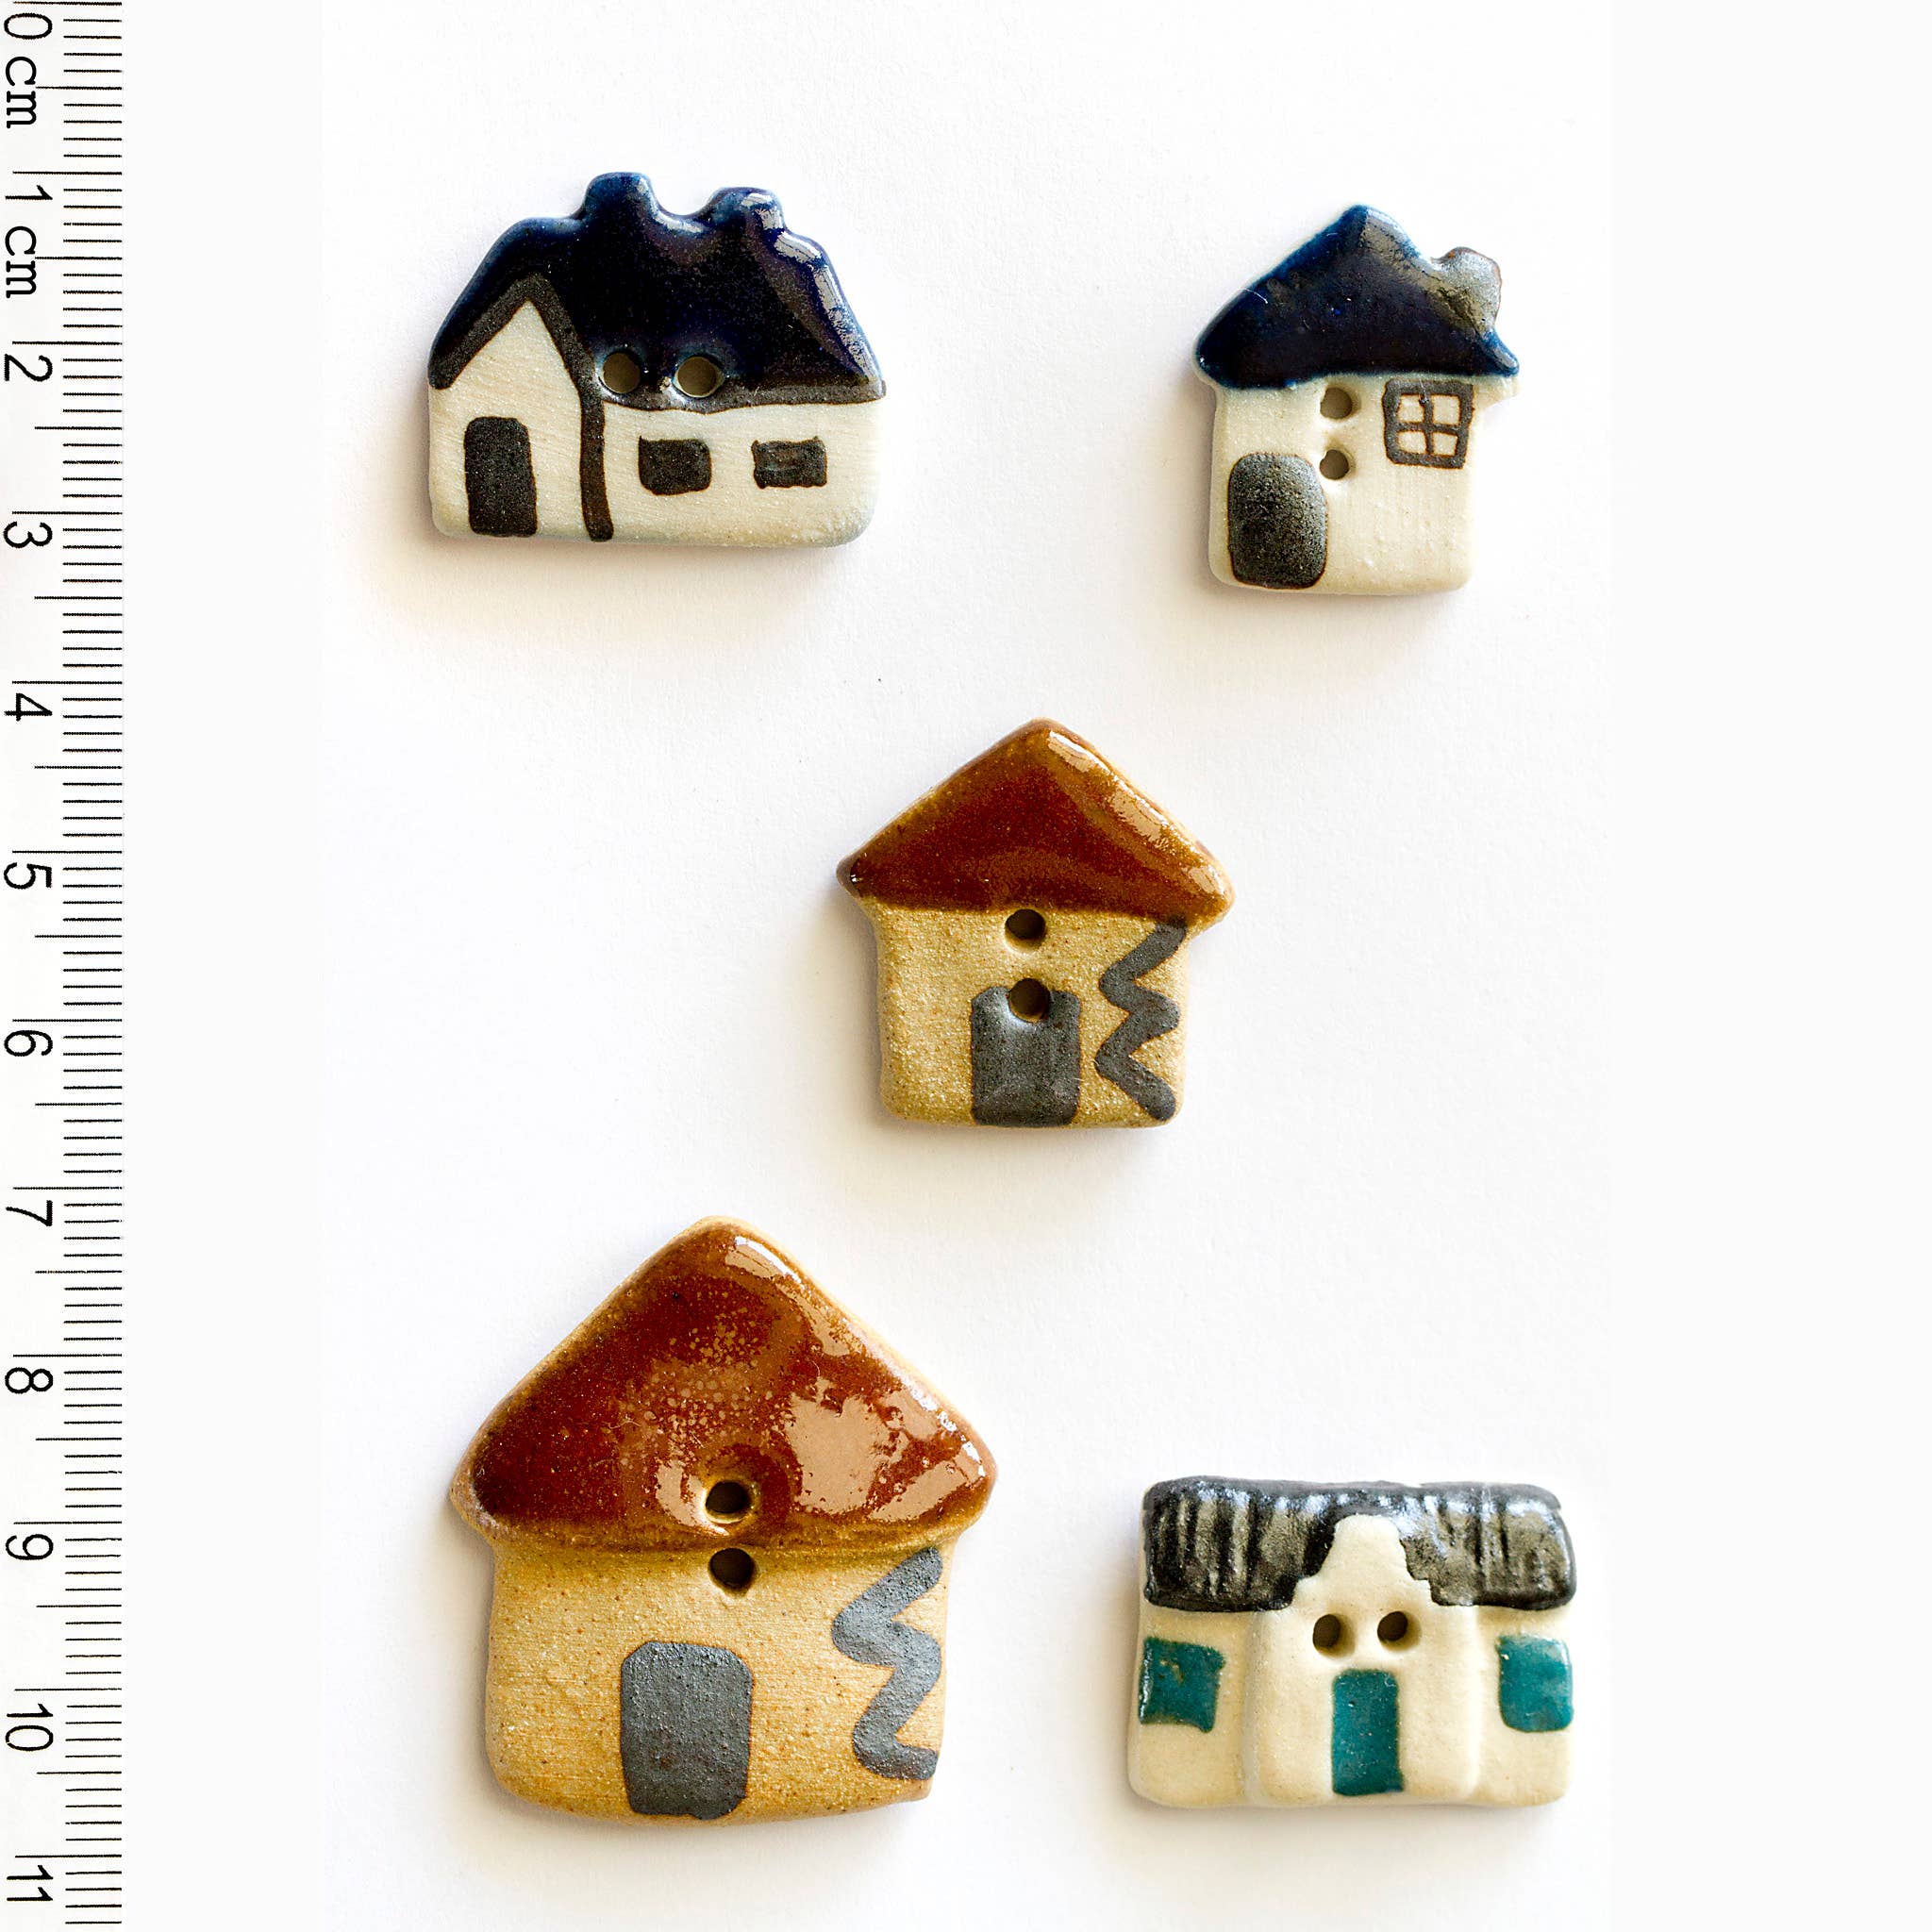 Incomparable Buttons - 5 House Buttons